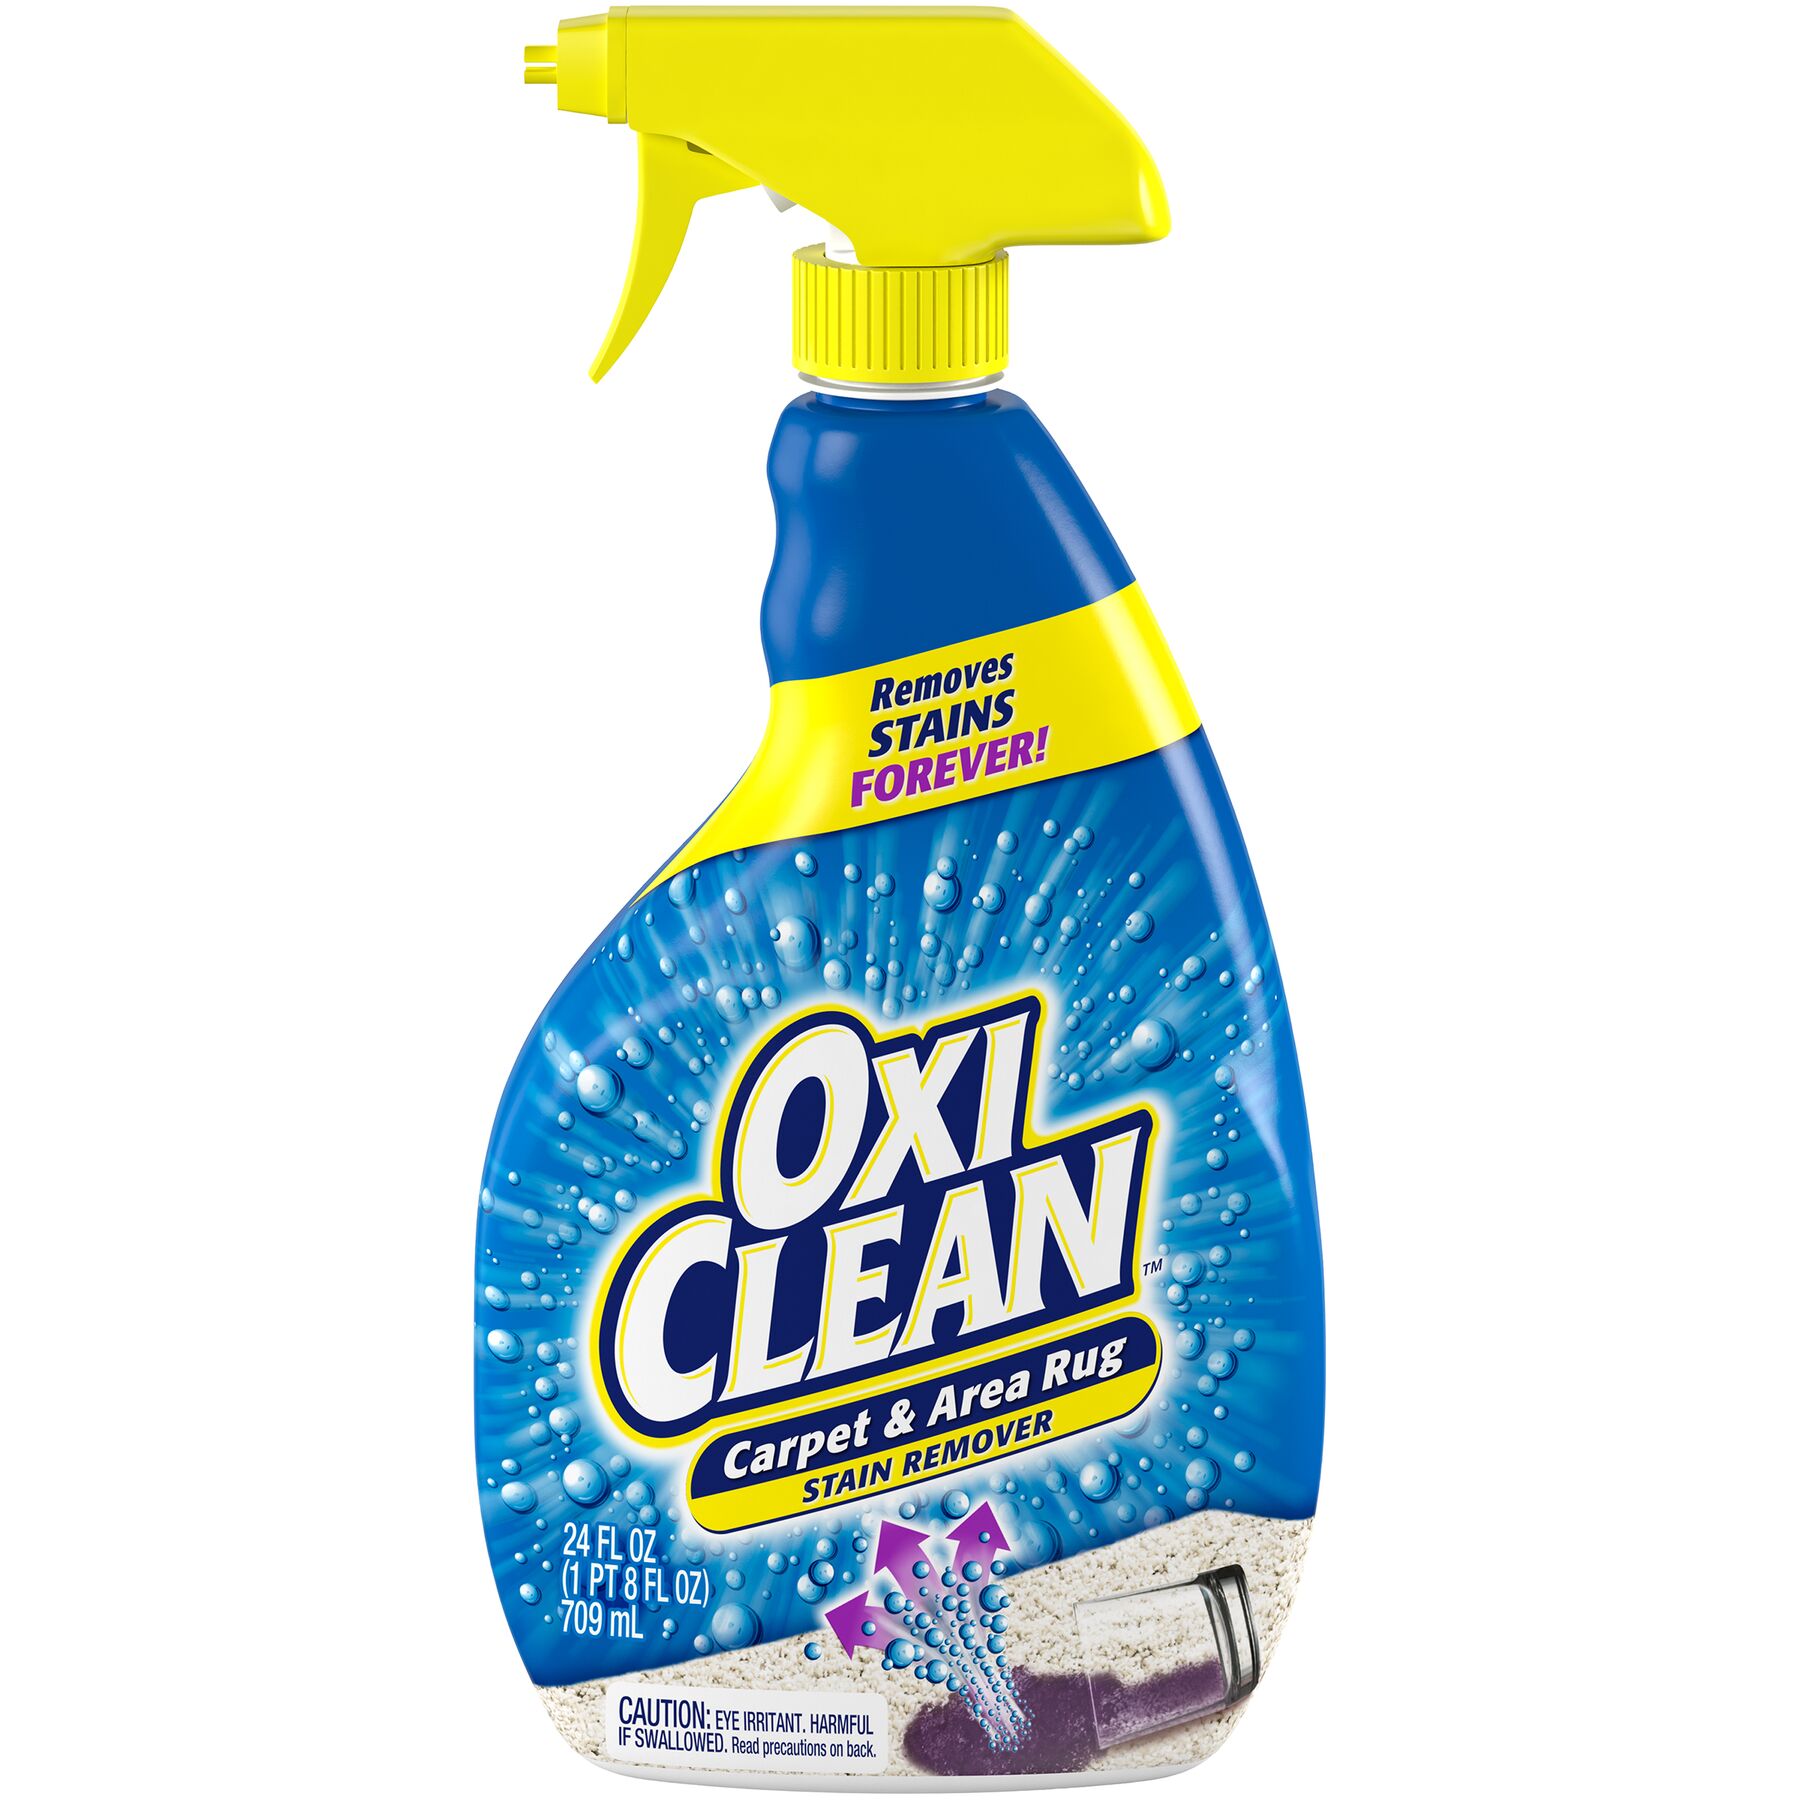 OxiClean Cleaners, OxiClean Carpet Stain Remover Trigger Spray